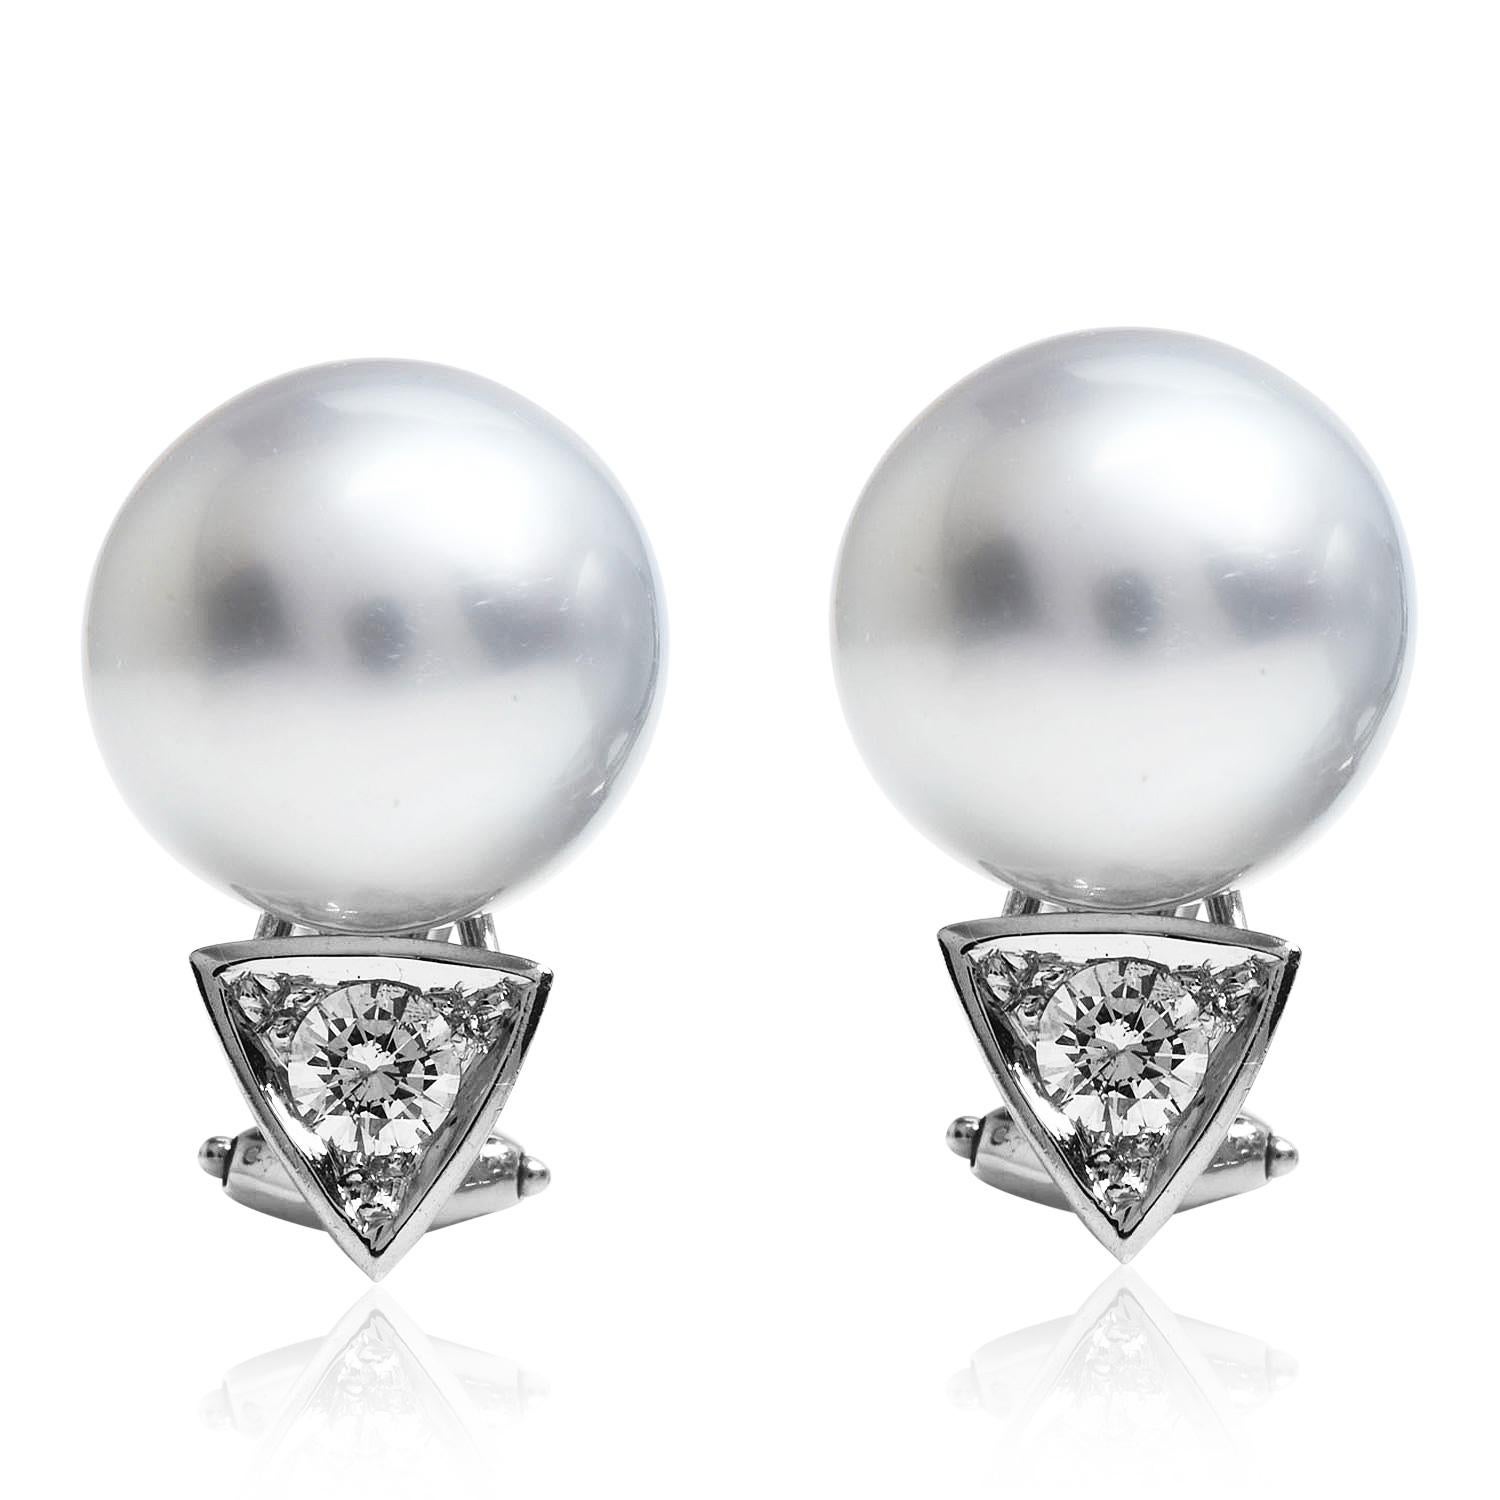 These elegant South Sea Pearl Clip Back Studs, Measuring 12.5mm each, These Gray Pearls are highly polished, and the light reflects from the almost unblemished surfaces.  Each Pearl is topped with a round cut, a prong set of Genuine